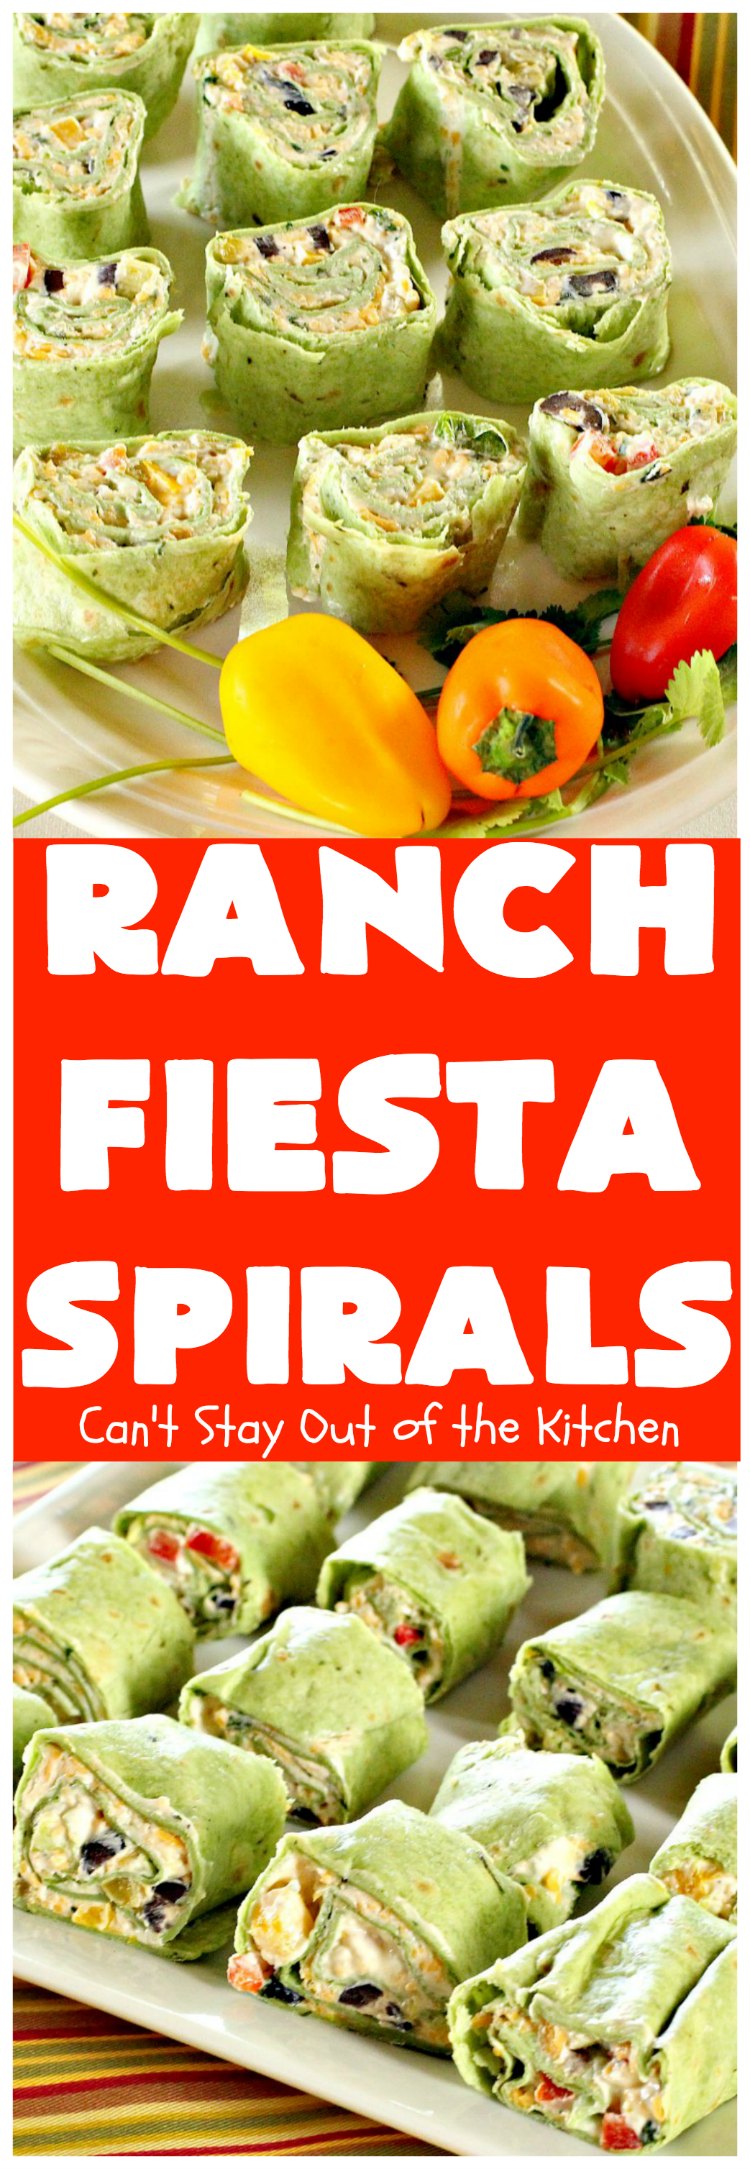 Ranch Fiesta Spirals | Can't Stay Out of the Kitchen